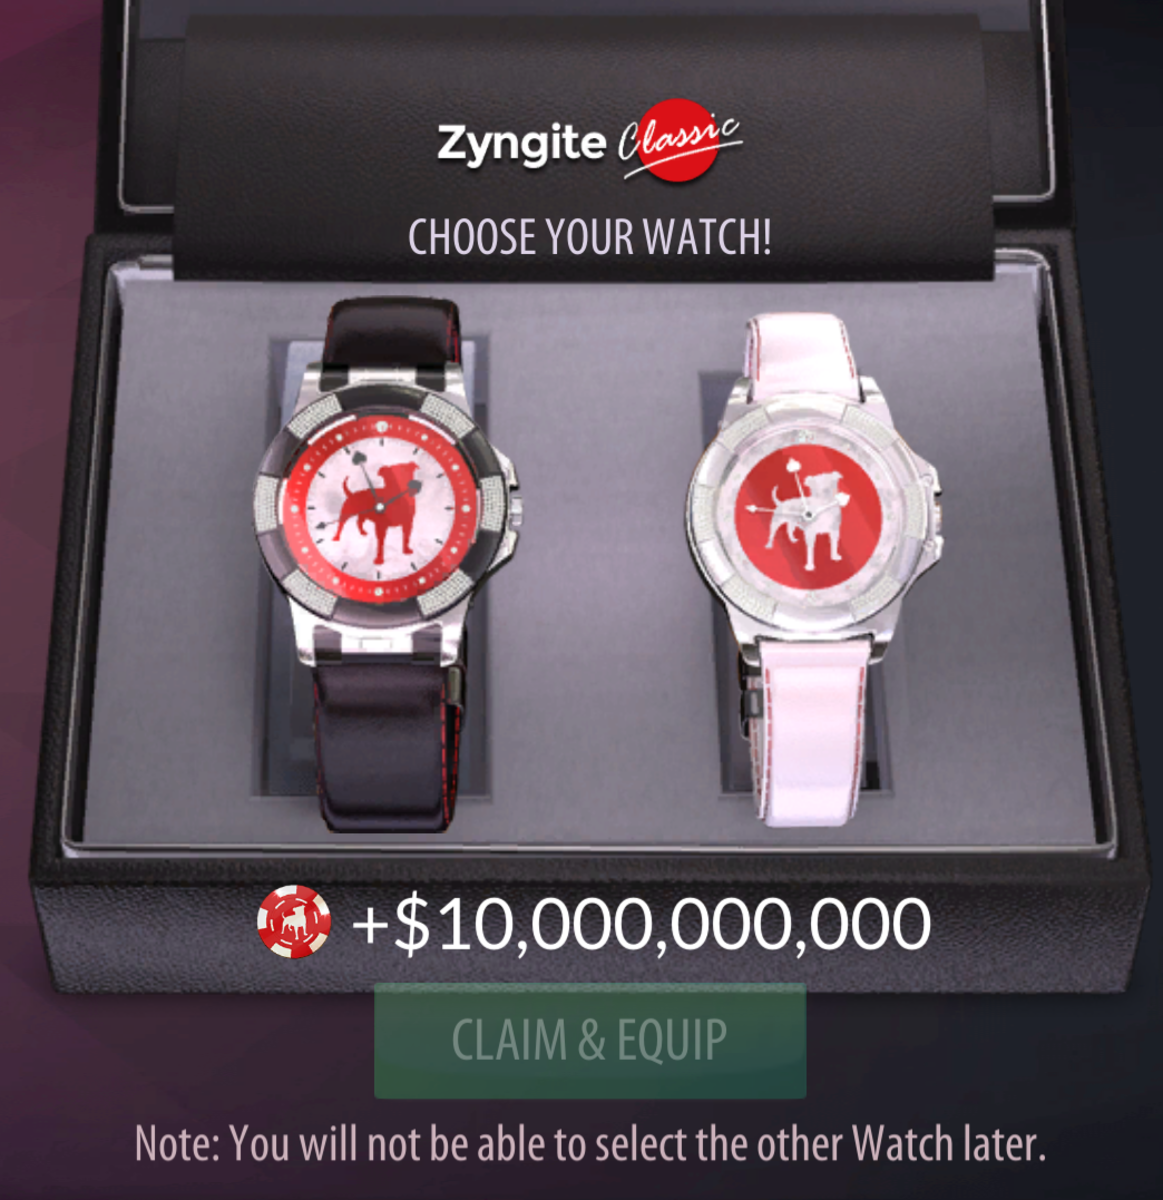 This is the Zyngite Classic watch. There are two versions you can pick.